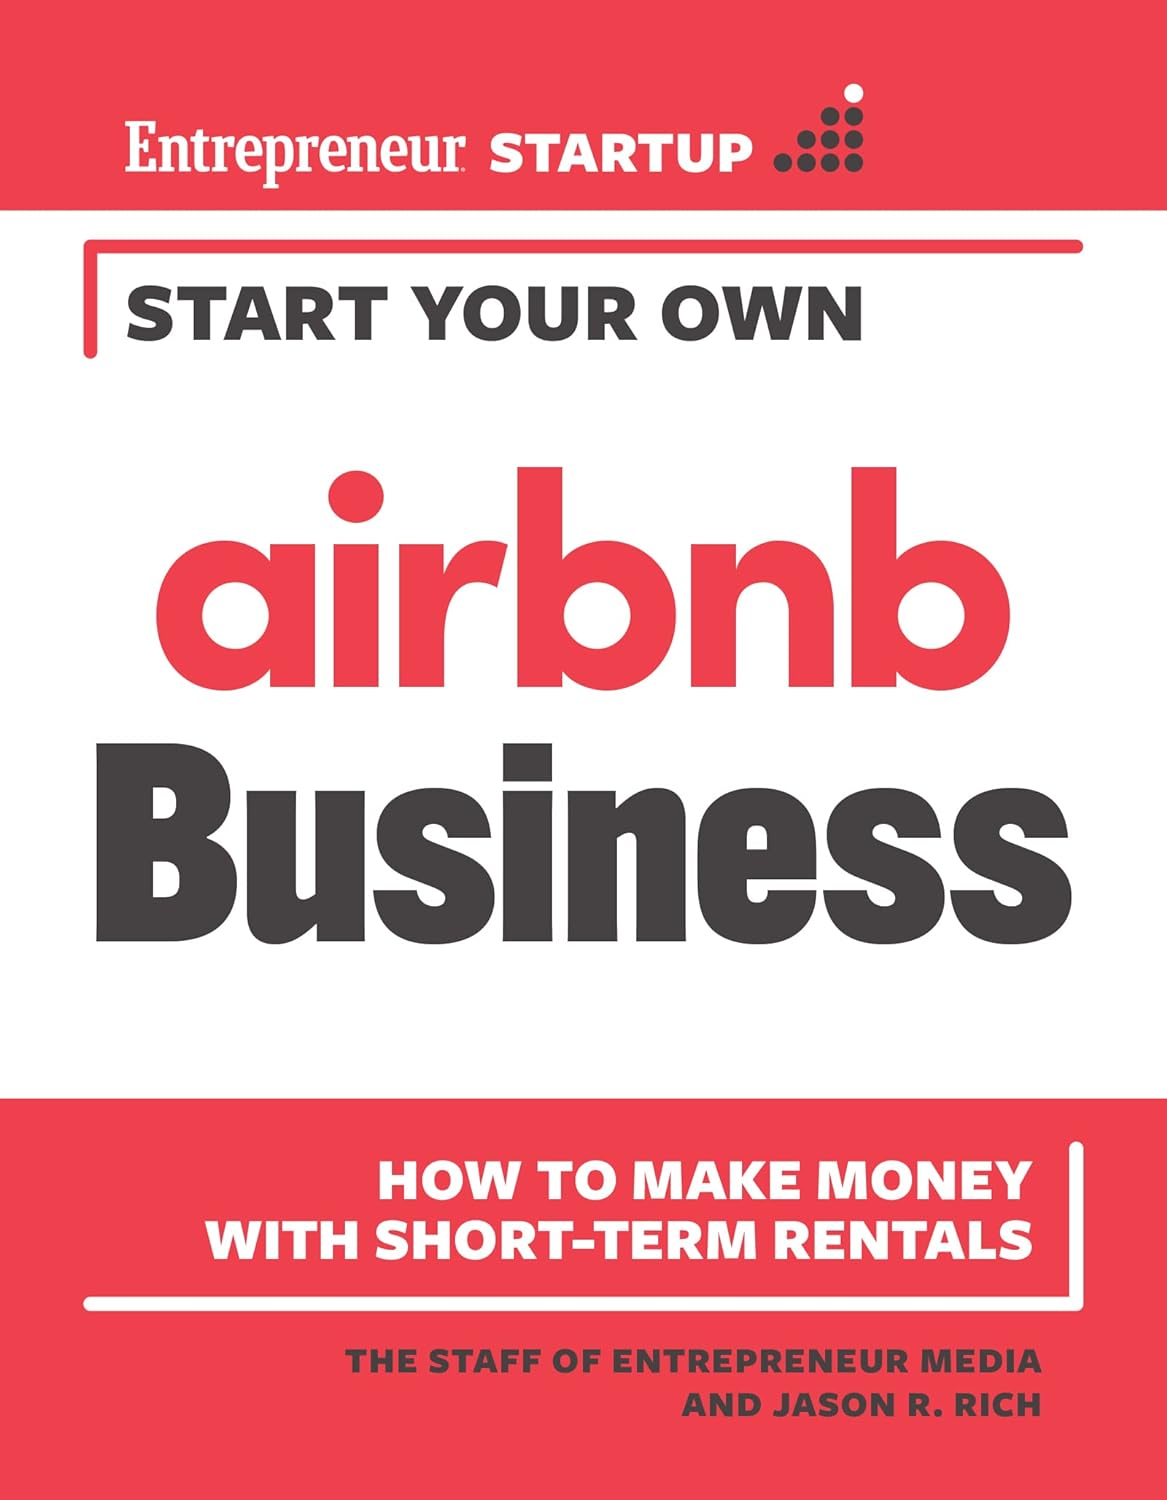 Start Your Own Airbnb Business How to Make Money with Short-Term Rentals (Start Your Own) - SureShot Books Publishing LLC